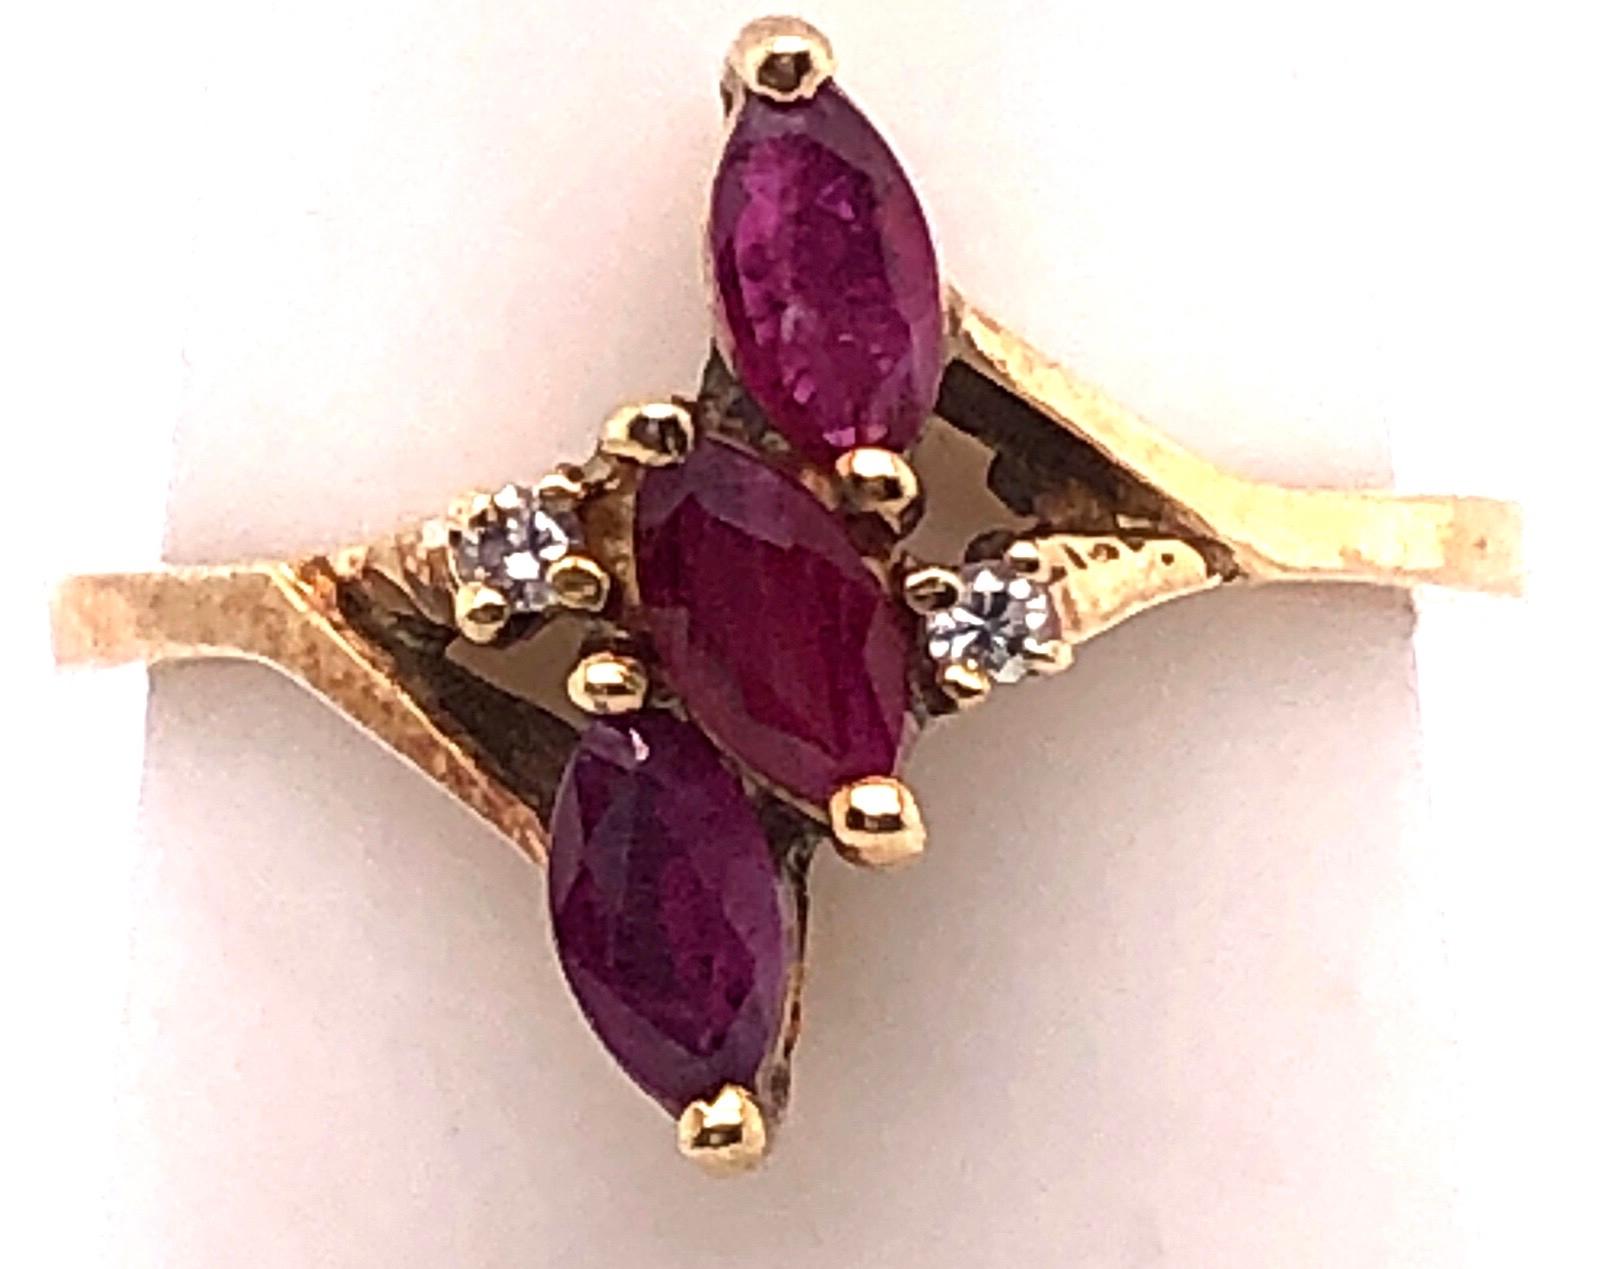 14 Karat Yellow Gold Free Form Ruby With Diamond Accent Ring Size 5.5
Size 5.5
2.80 grams total weight.